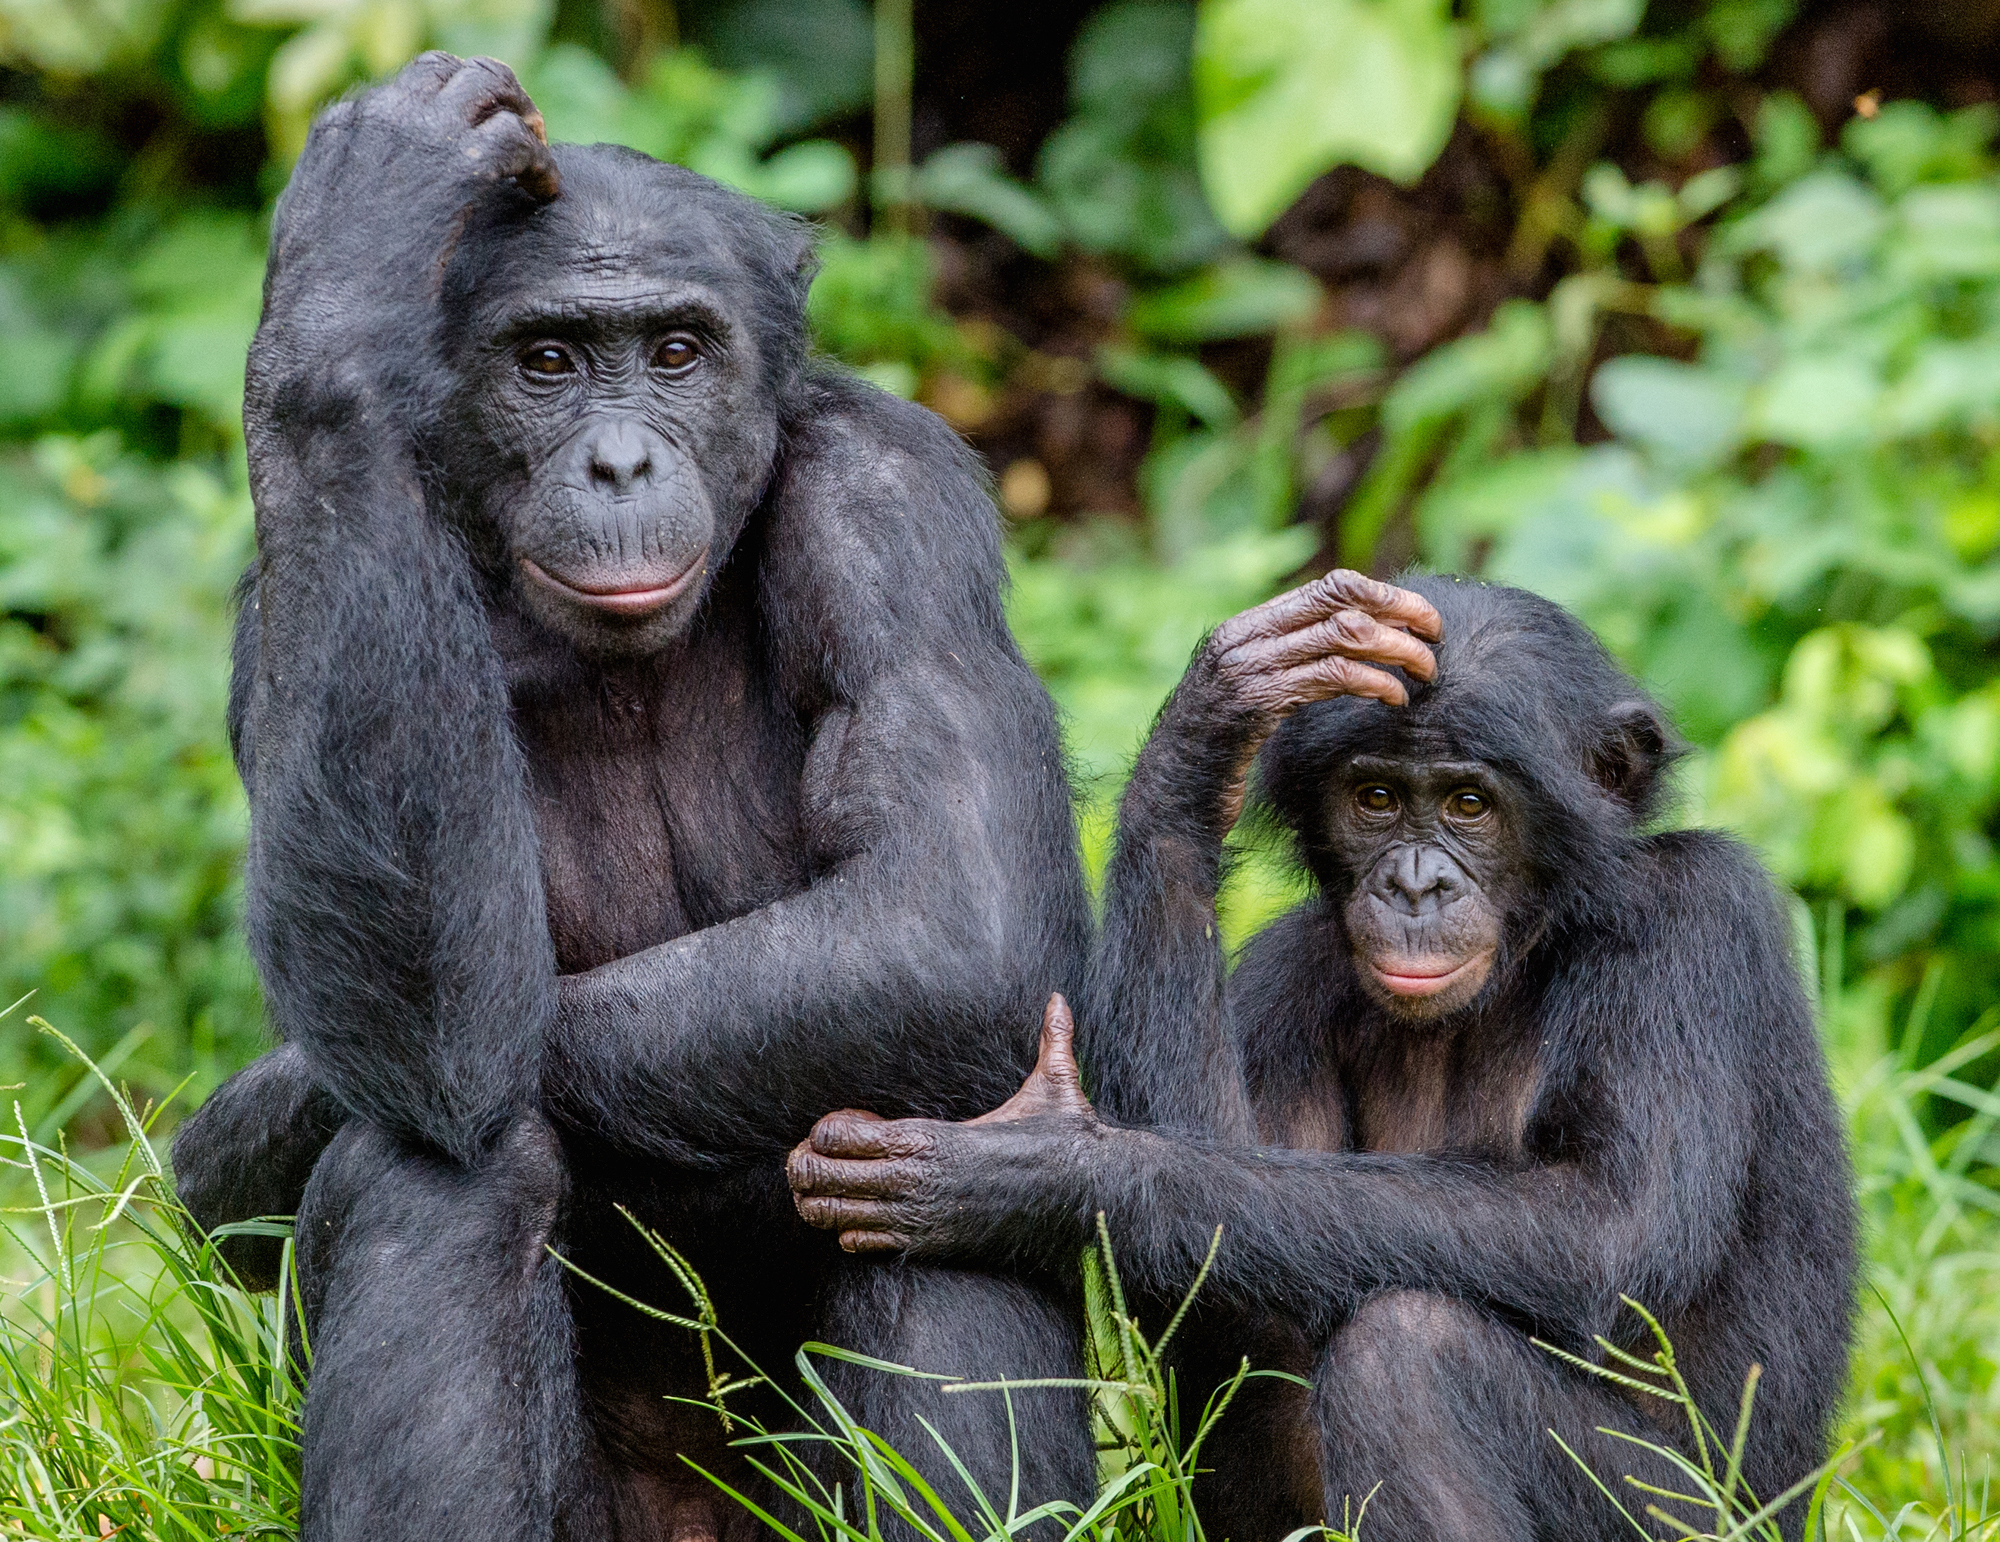 Humans Can Understand Apes’ Sign Language